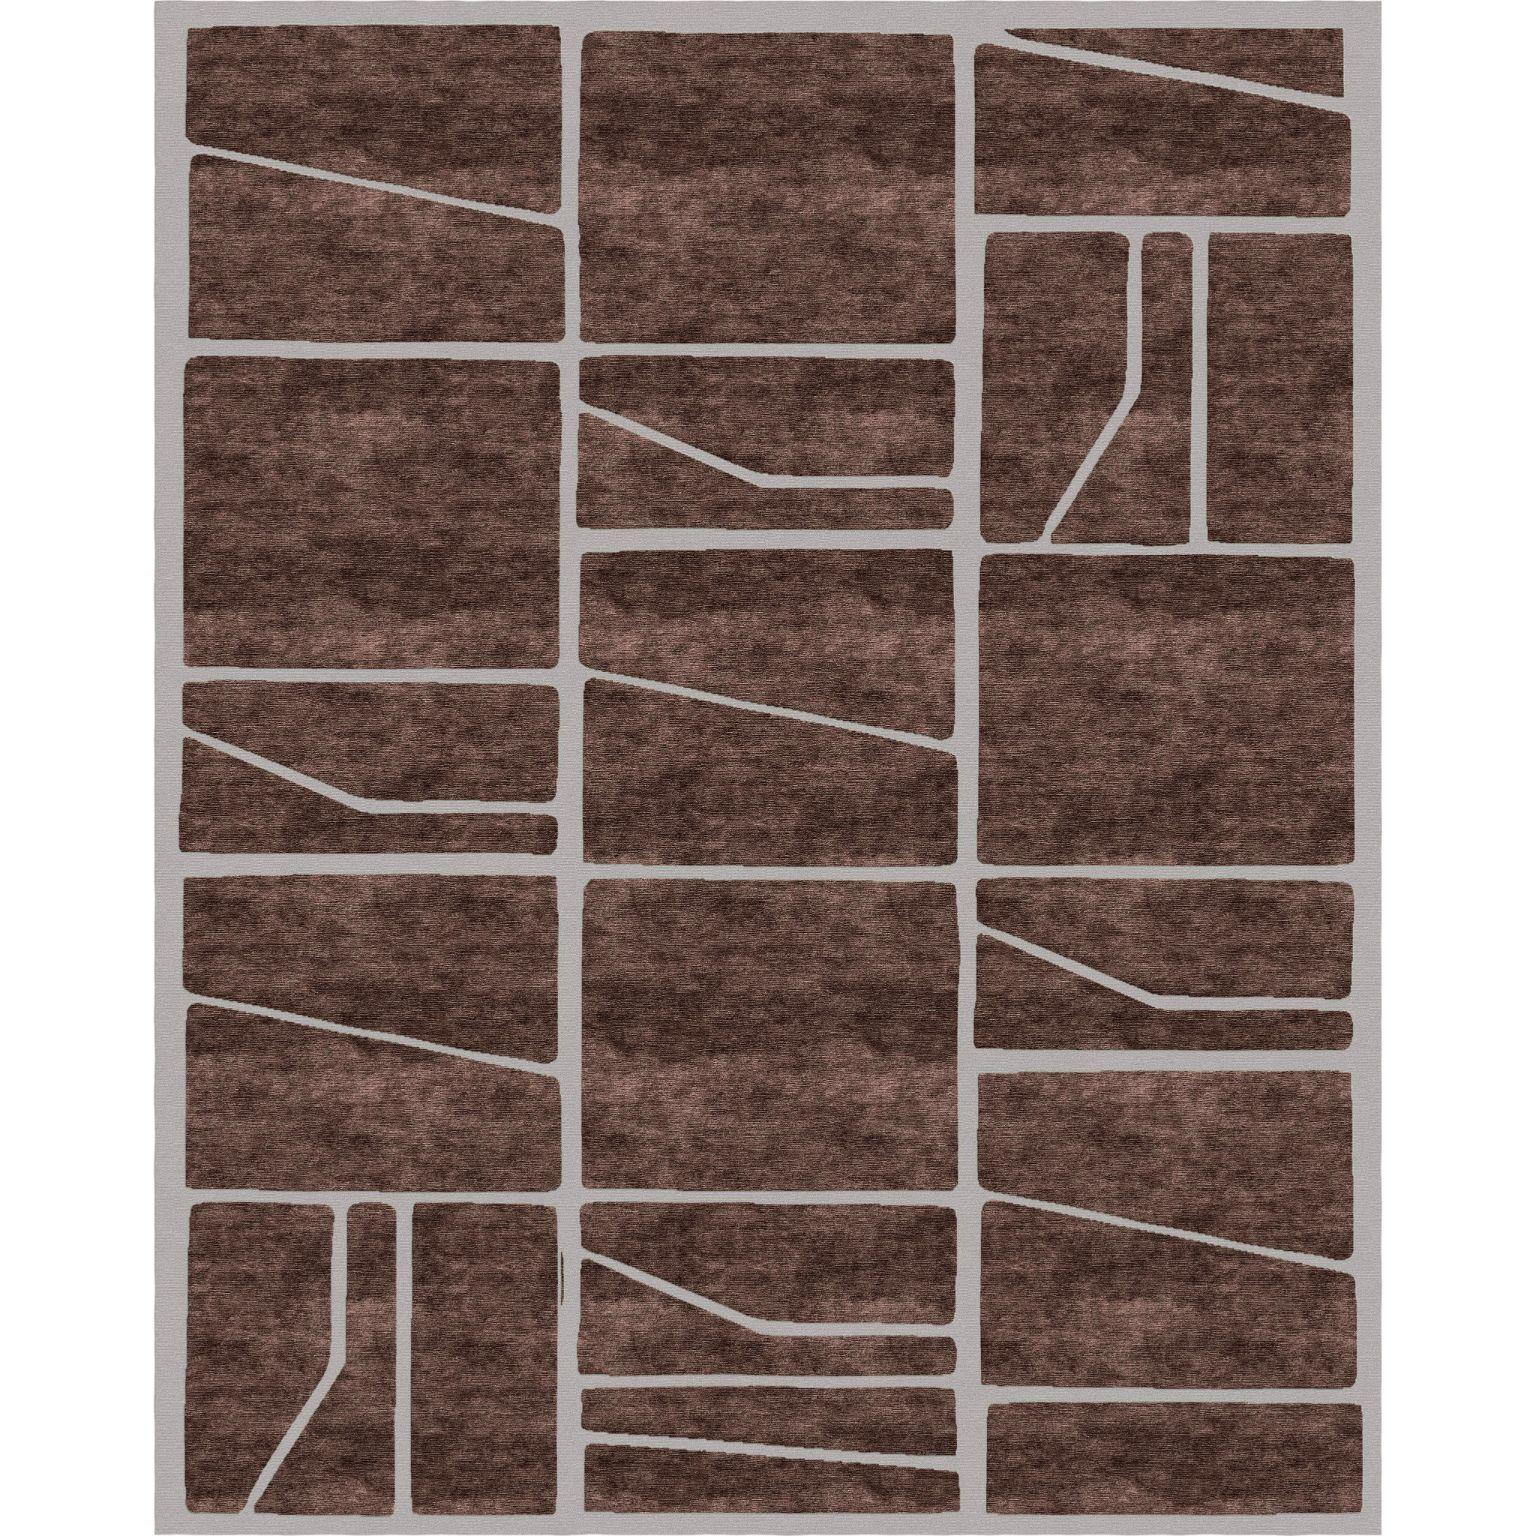 Terracotta tiles small rug by Art & Loom
Dimensions: D 243.4 x H 304.8 cm
Materials: New Zealand wool & Chinese silk—loop & cut
Quality (Knots per Inch): 100
Also available in different dimensions.

Samantha Gallacher has always had a keen eye